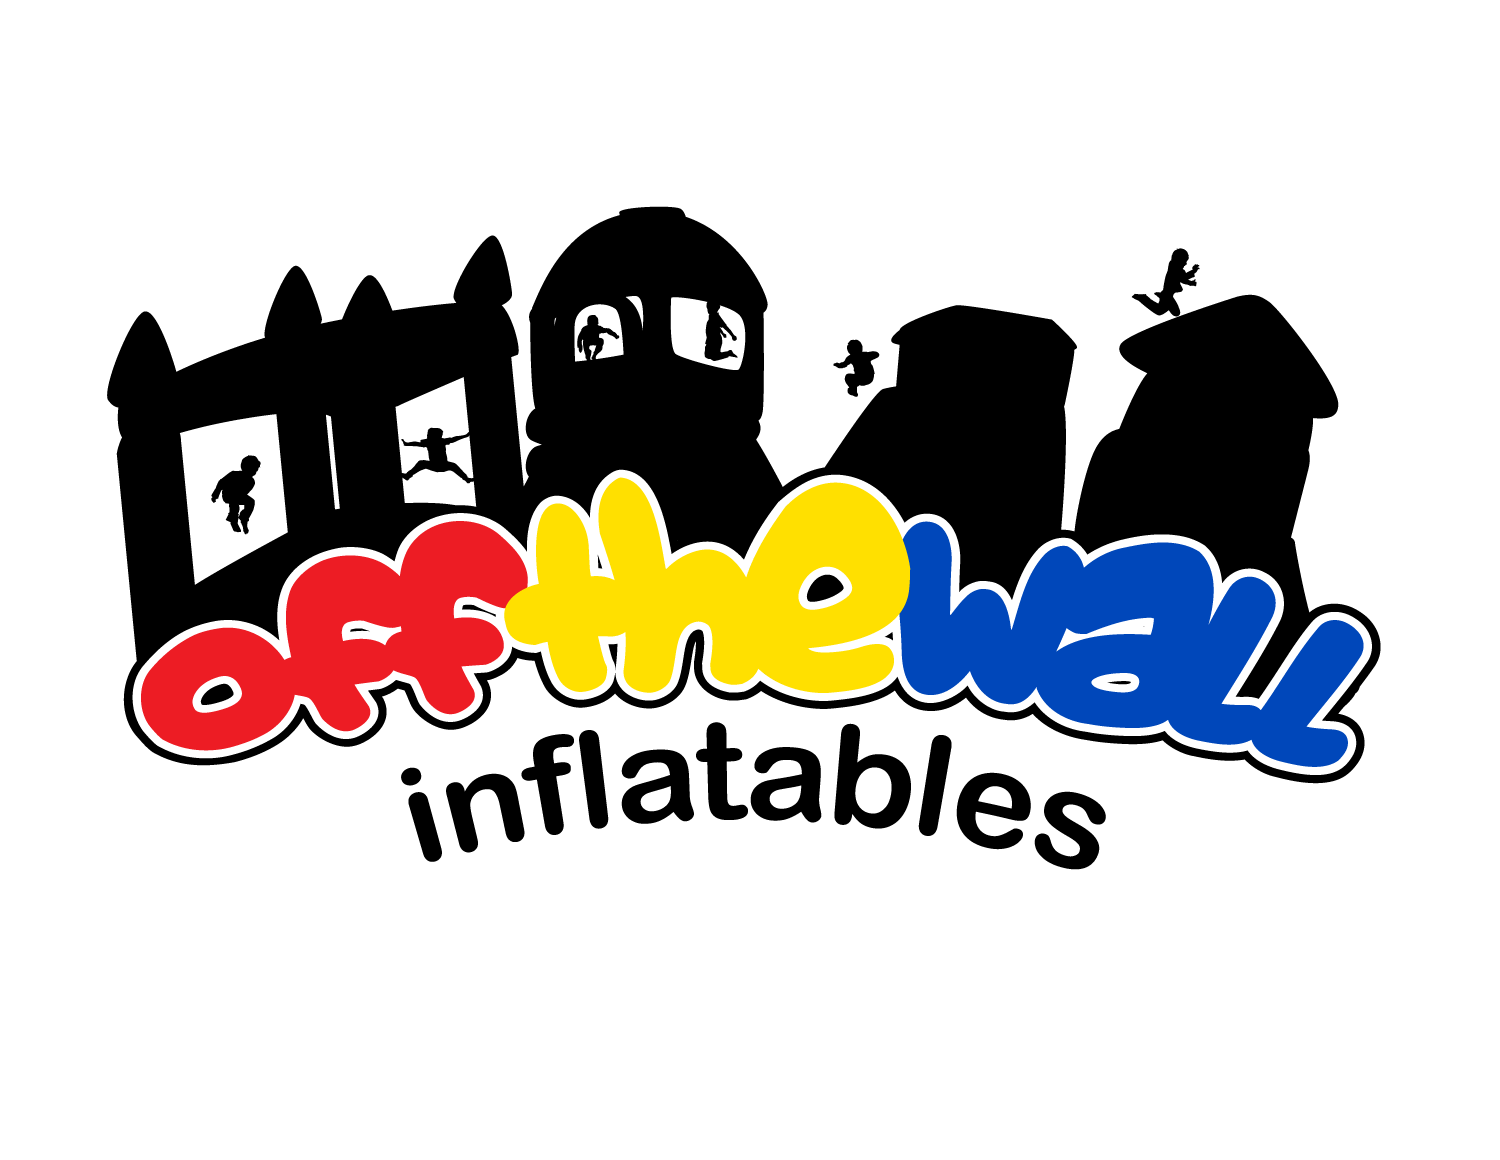 OFFTHEWALLinflatables.png